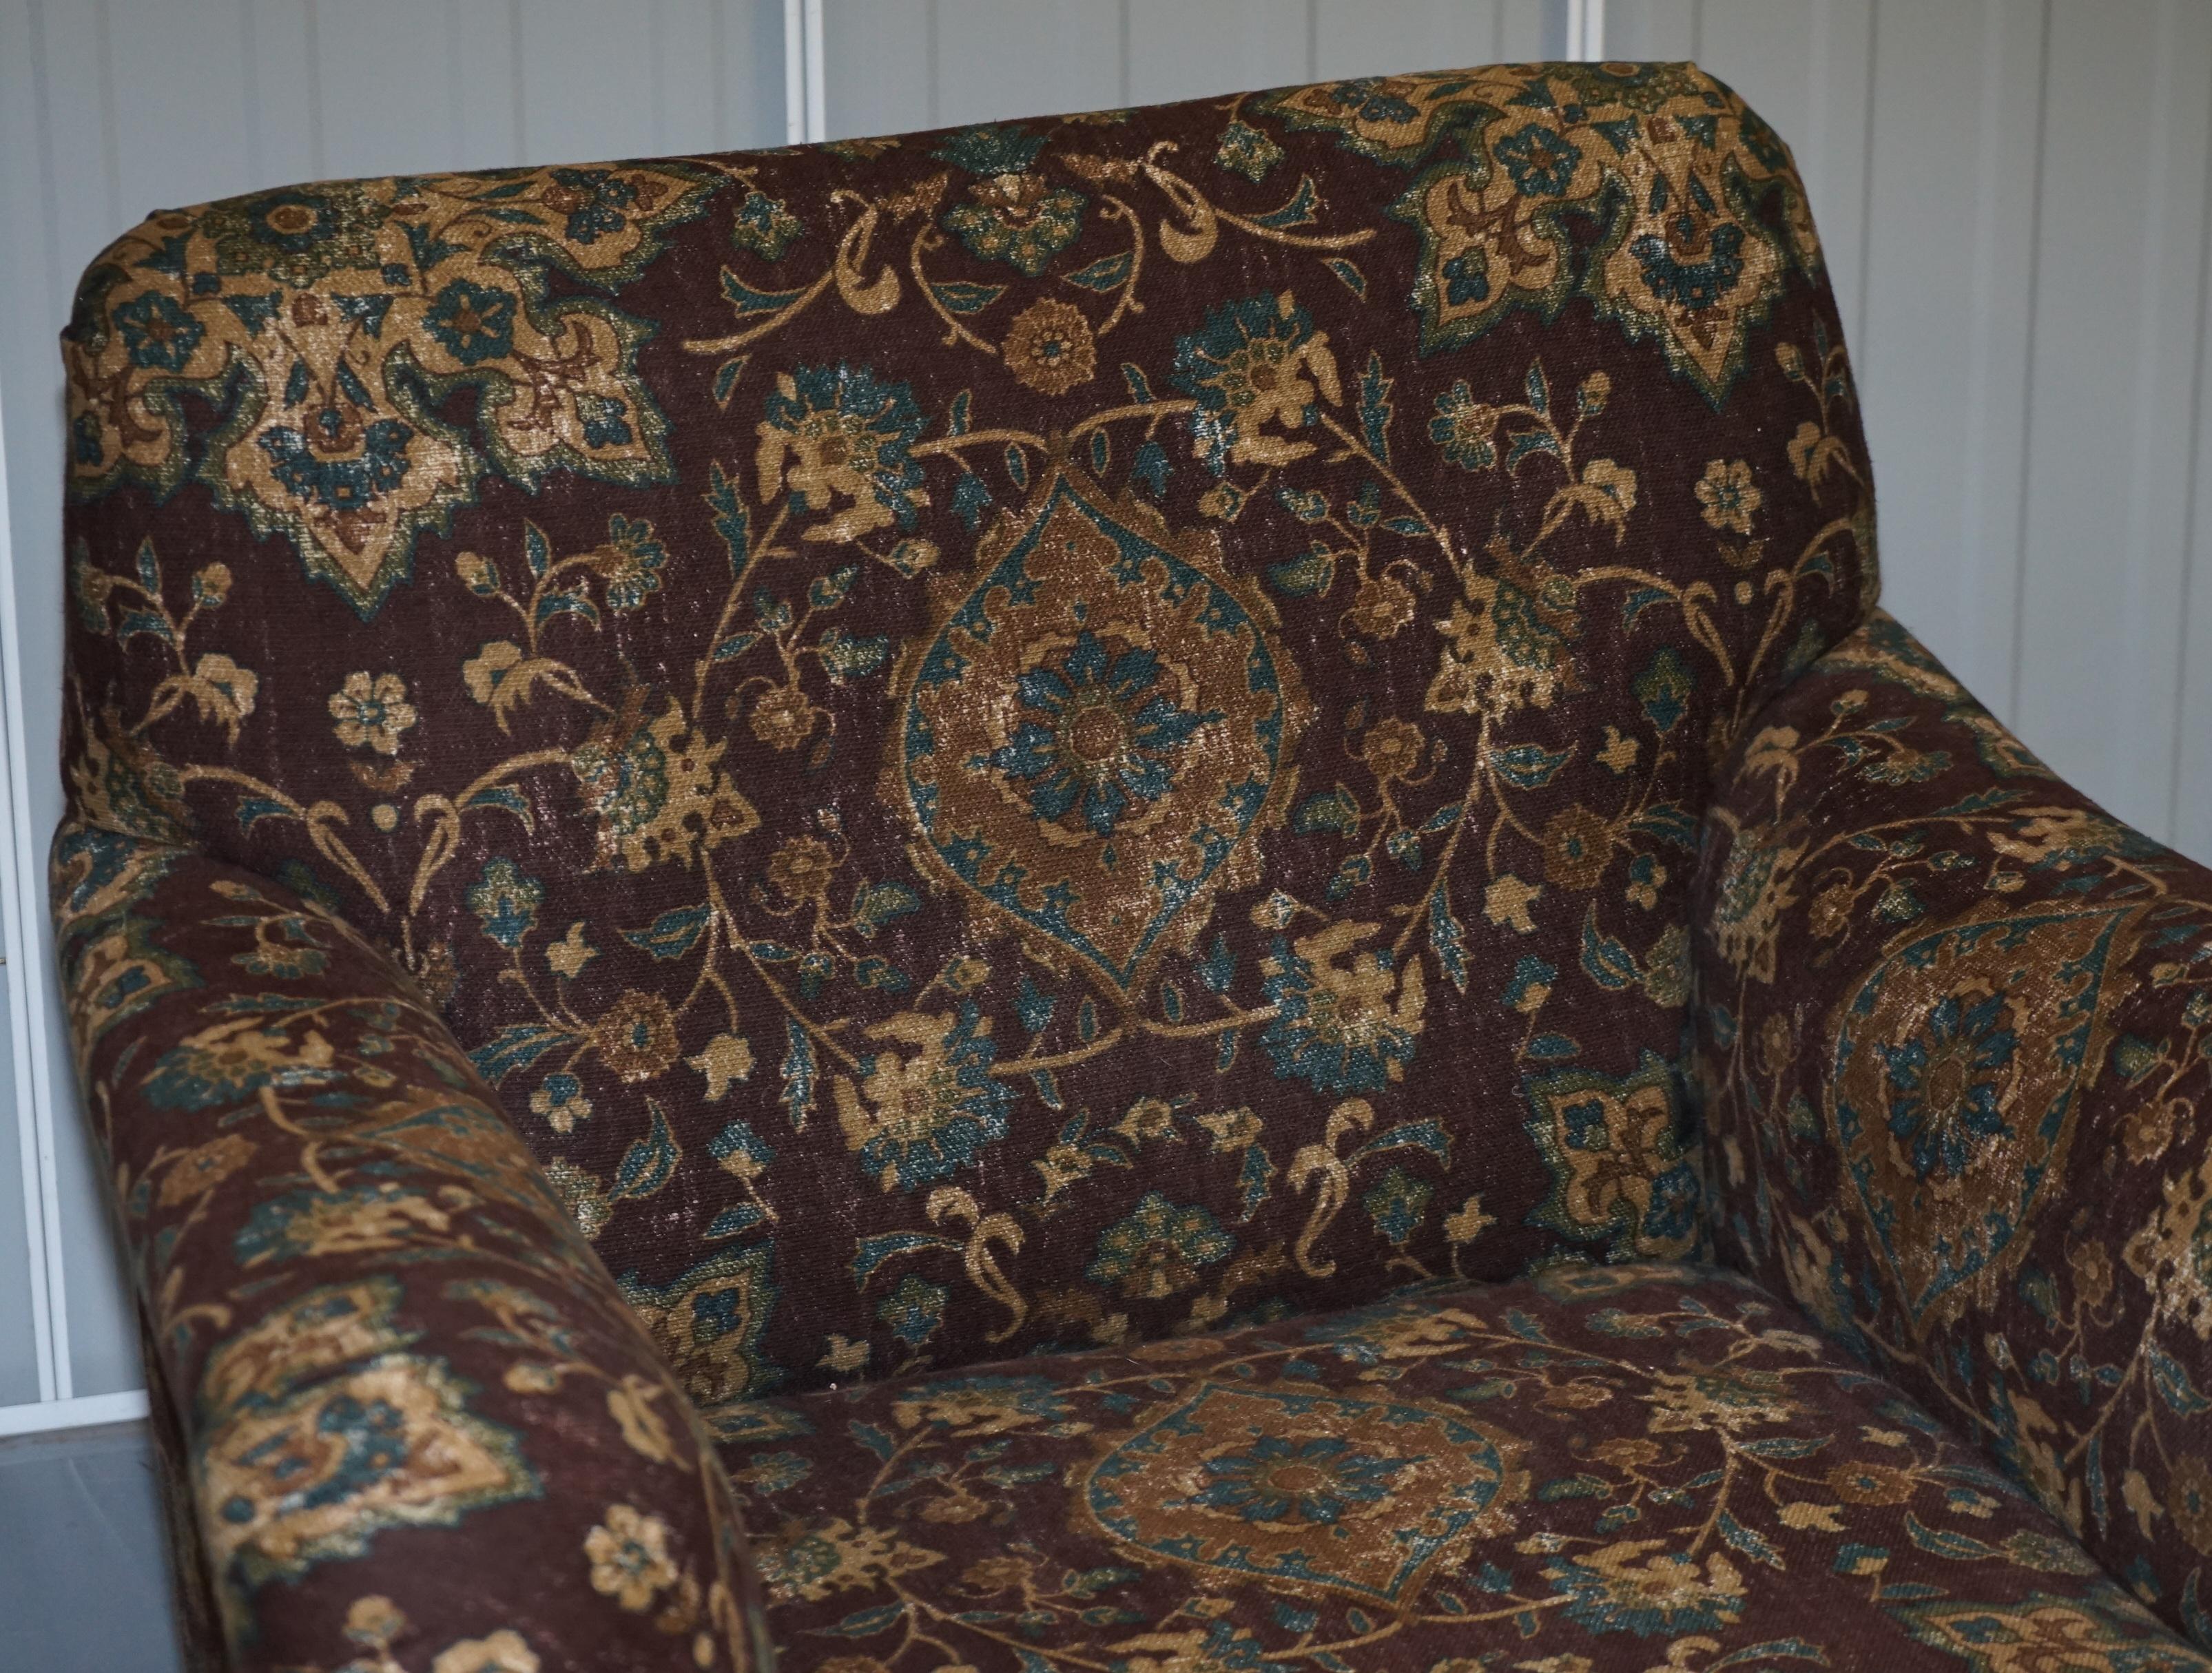 Hand-Crafted Large Oversized Ralph Lauren Chaise Lounge Sofa Armchair Floral Upholstery